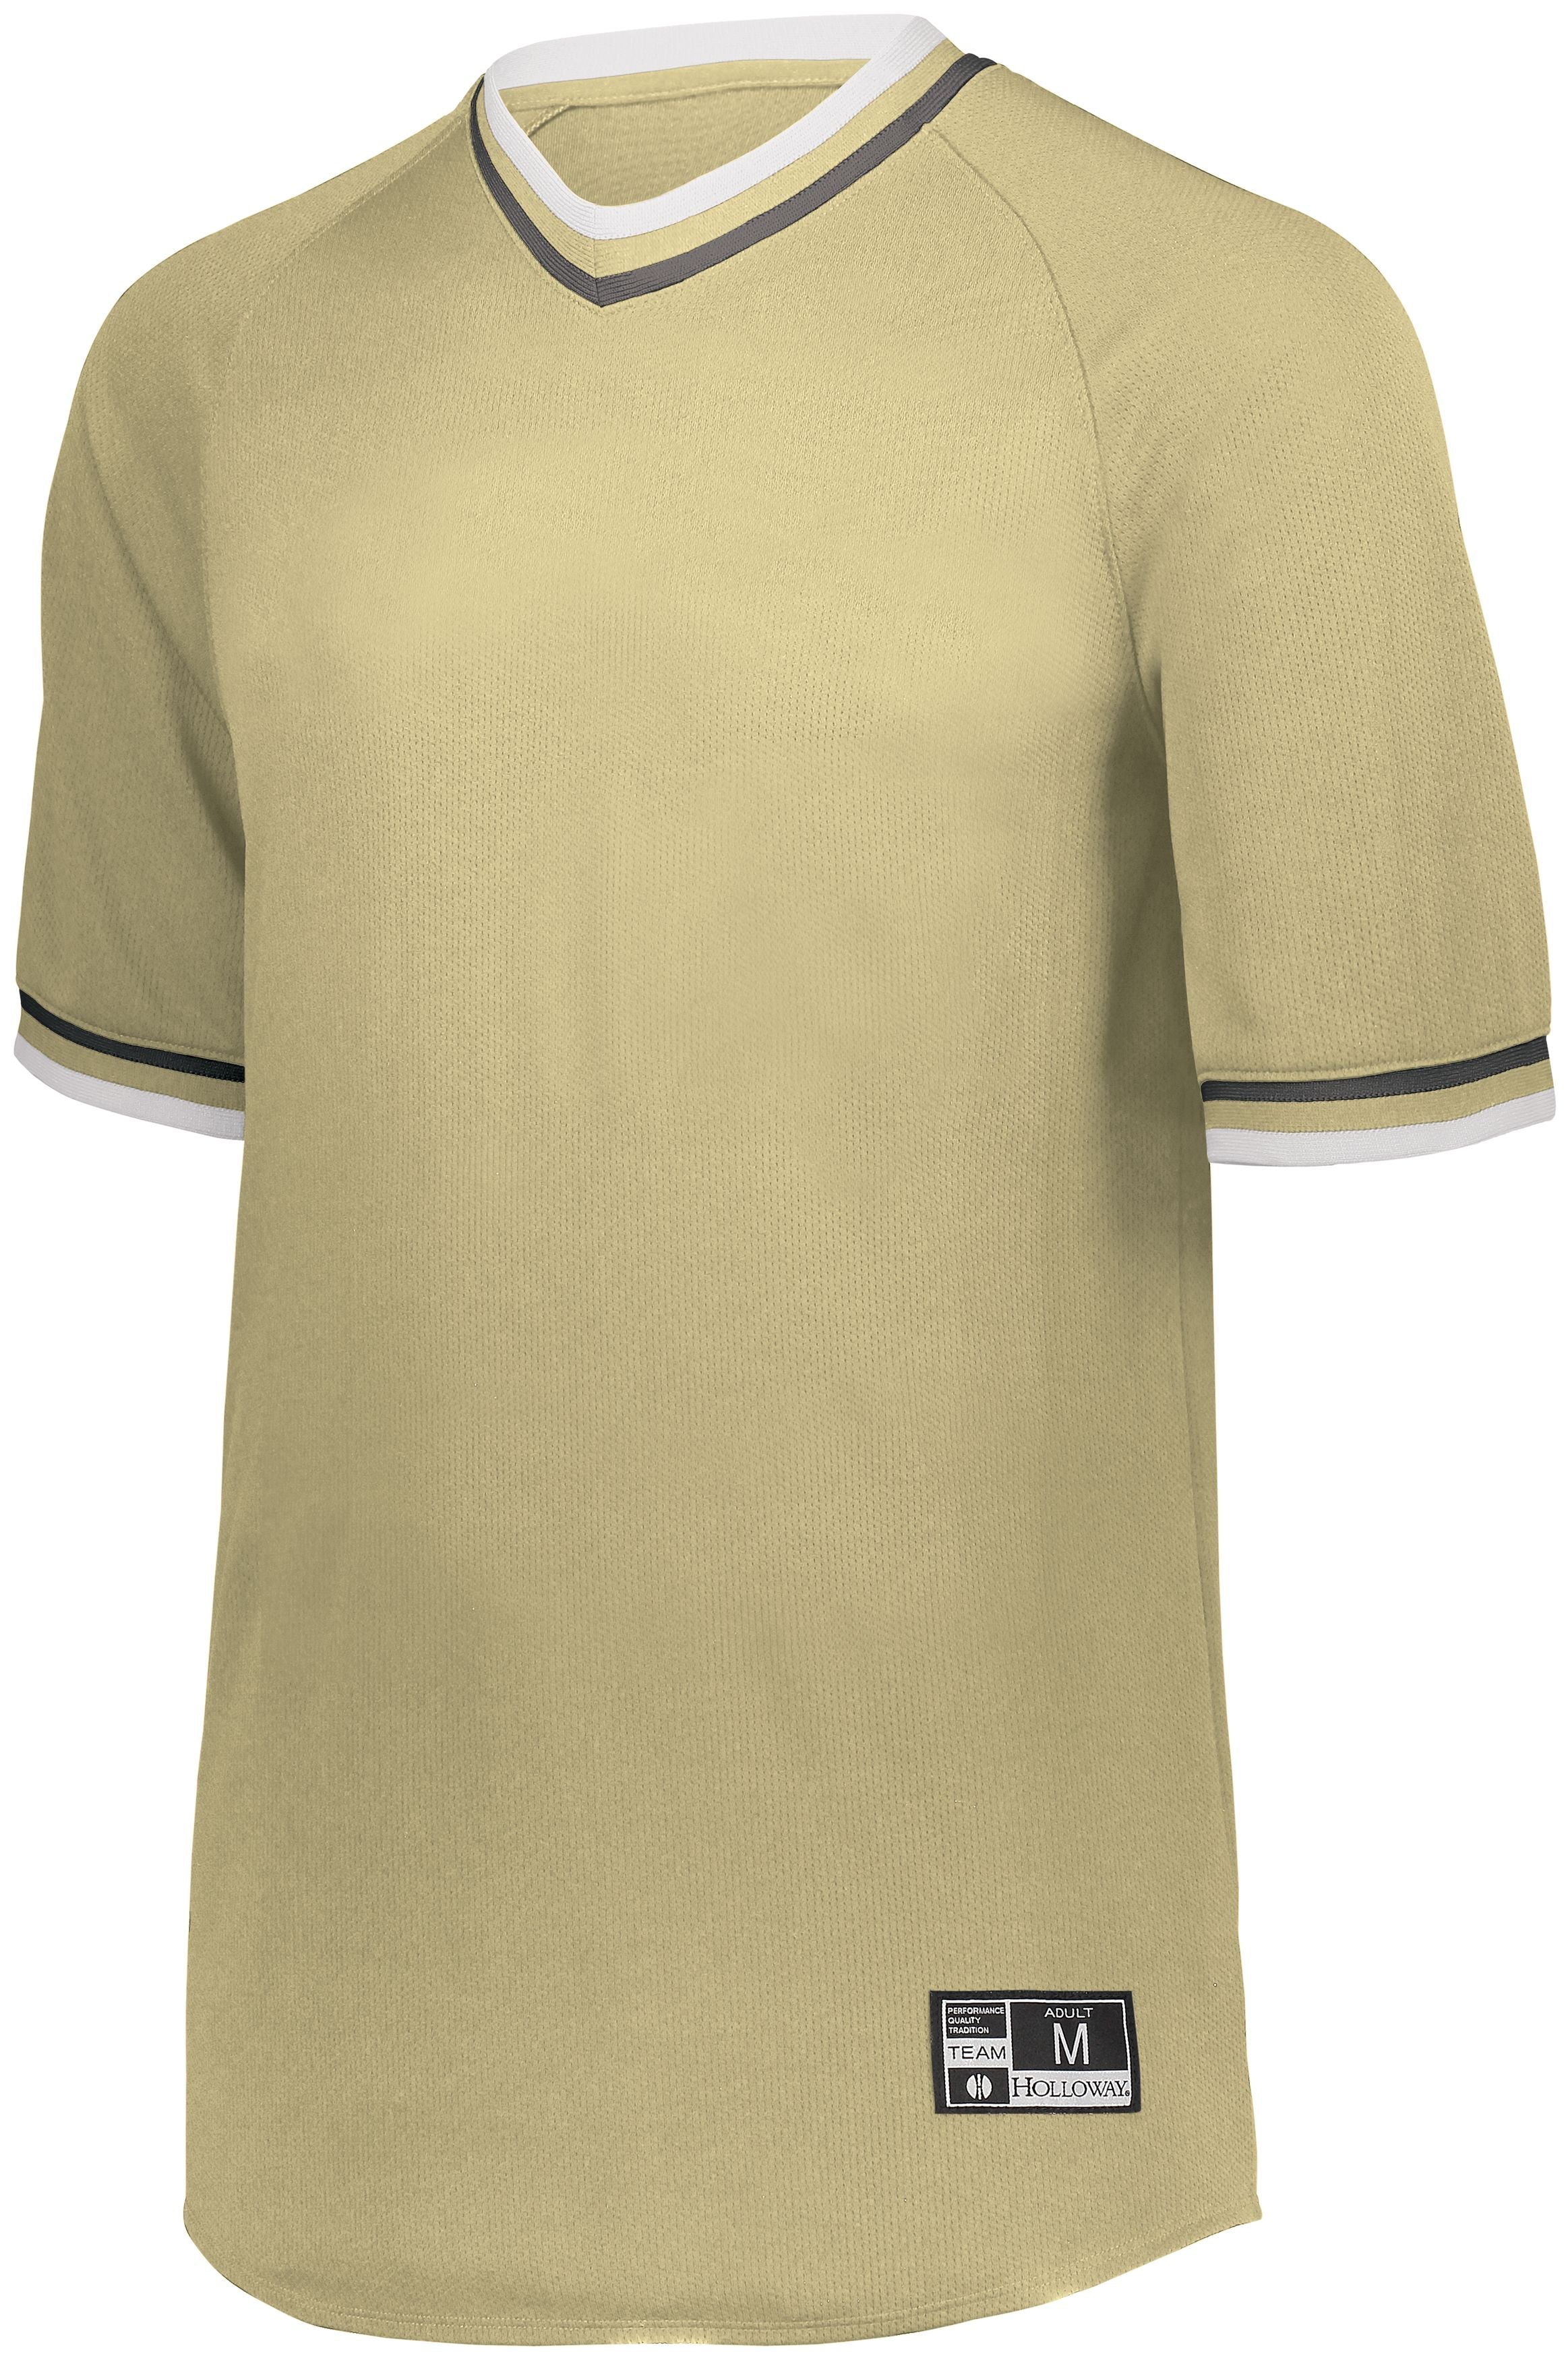 Holloway Retro V-Neck Baseball Jersey in Vegas Gold/White/Black  -Part of the Adult, Adult-Jersey, Baseball, Holloway, Shirts, All-Sports, All-Sports-1 product lines at KanaleyCreations.com